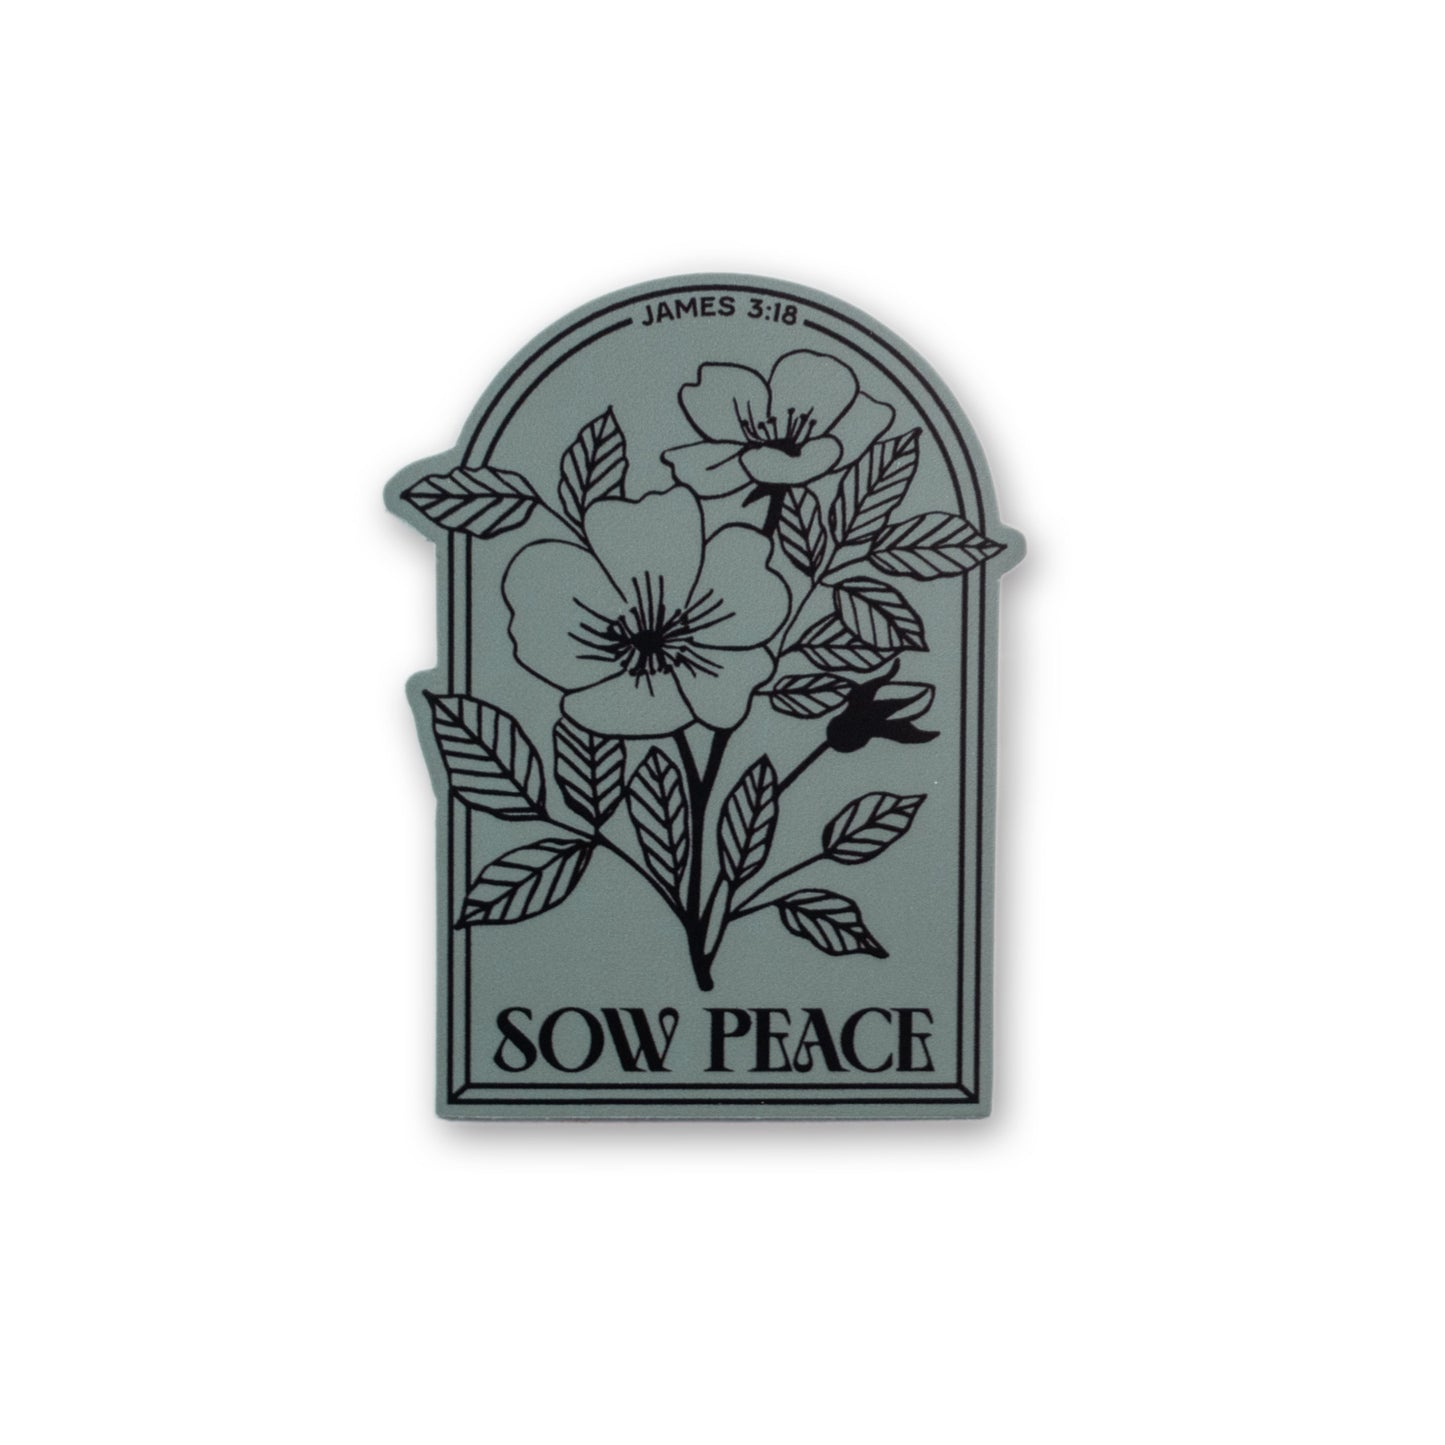 Sow Peace Christian Sticker